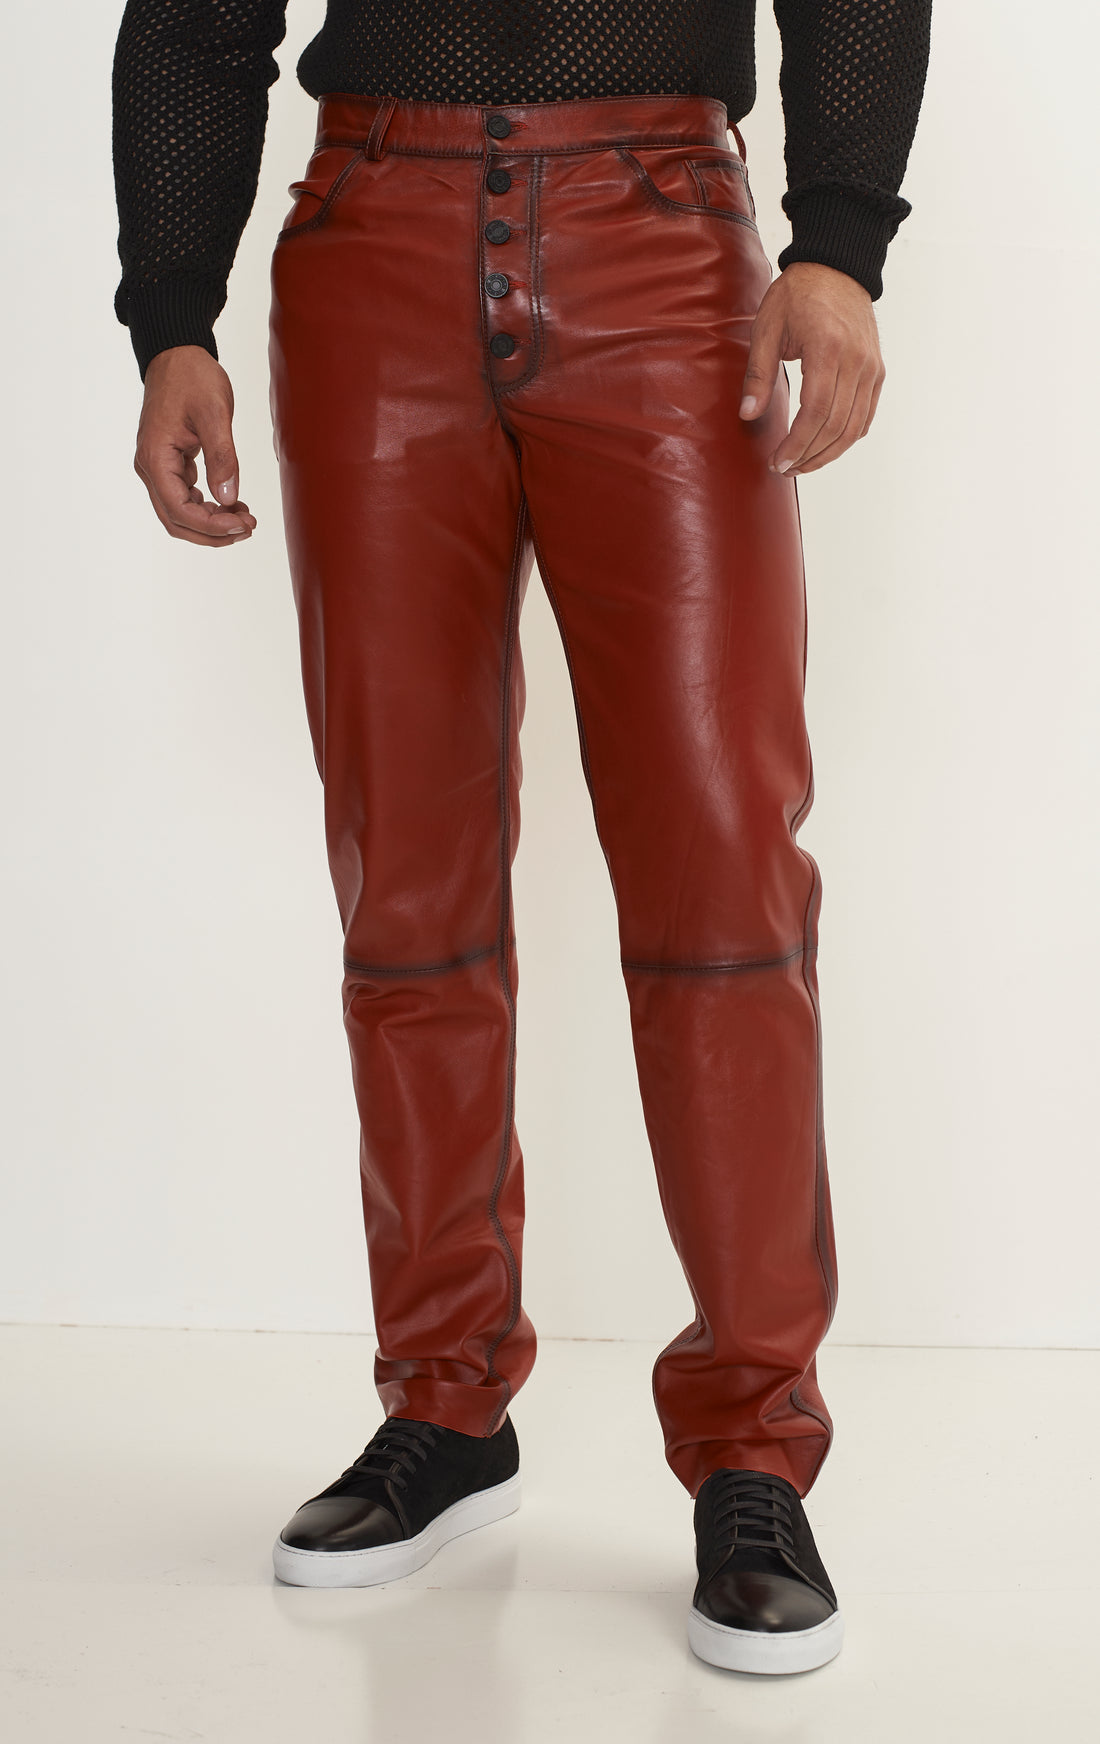 Genuine Lambskin Leather Pants - RED TINT